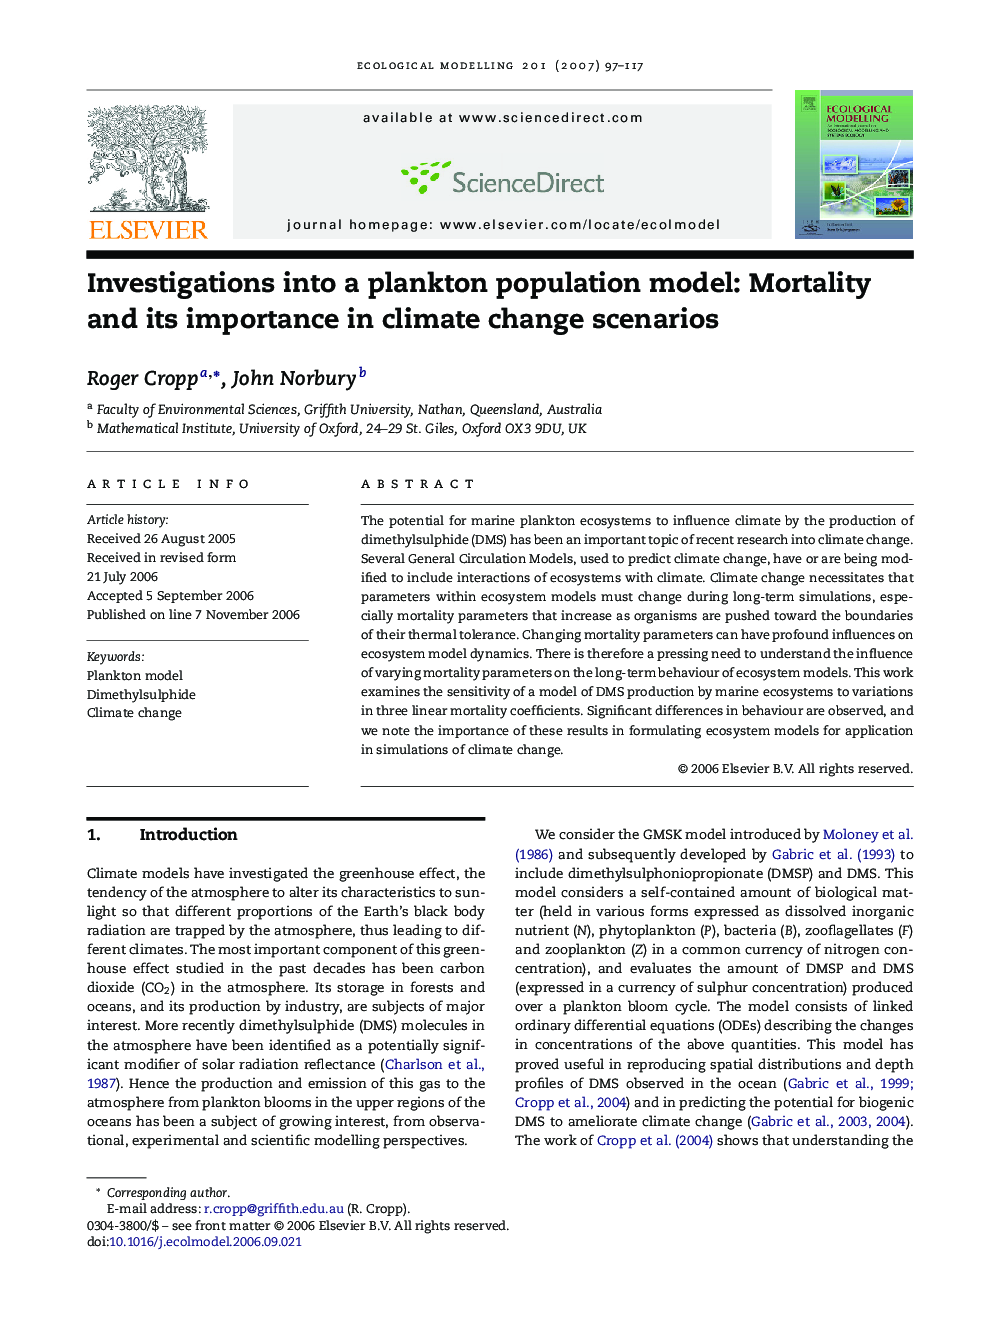 Investigations into a plankton population model: Mortality and its importance in climate change scenarios